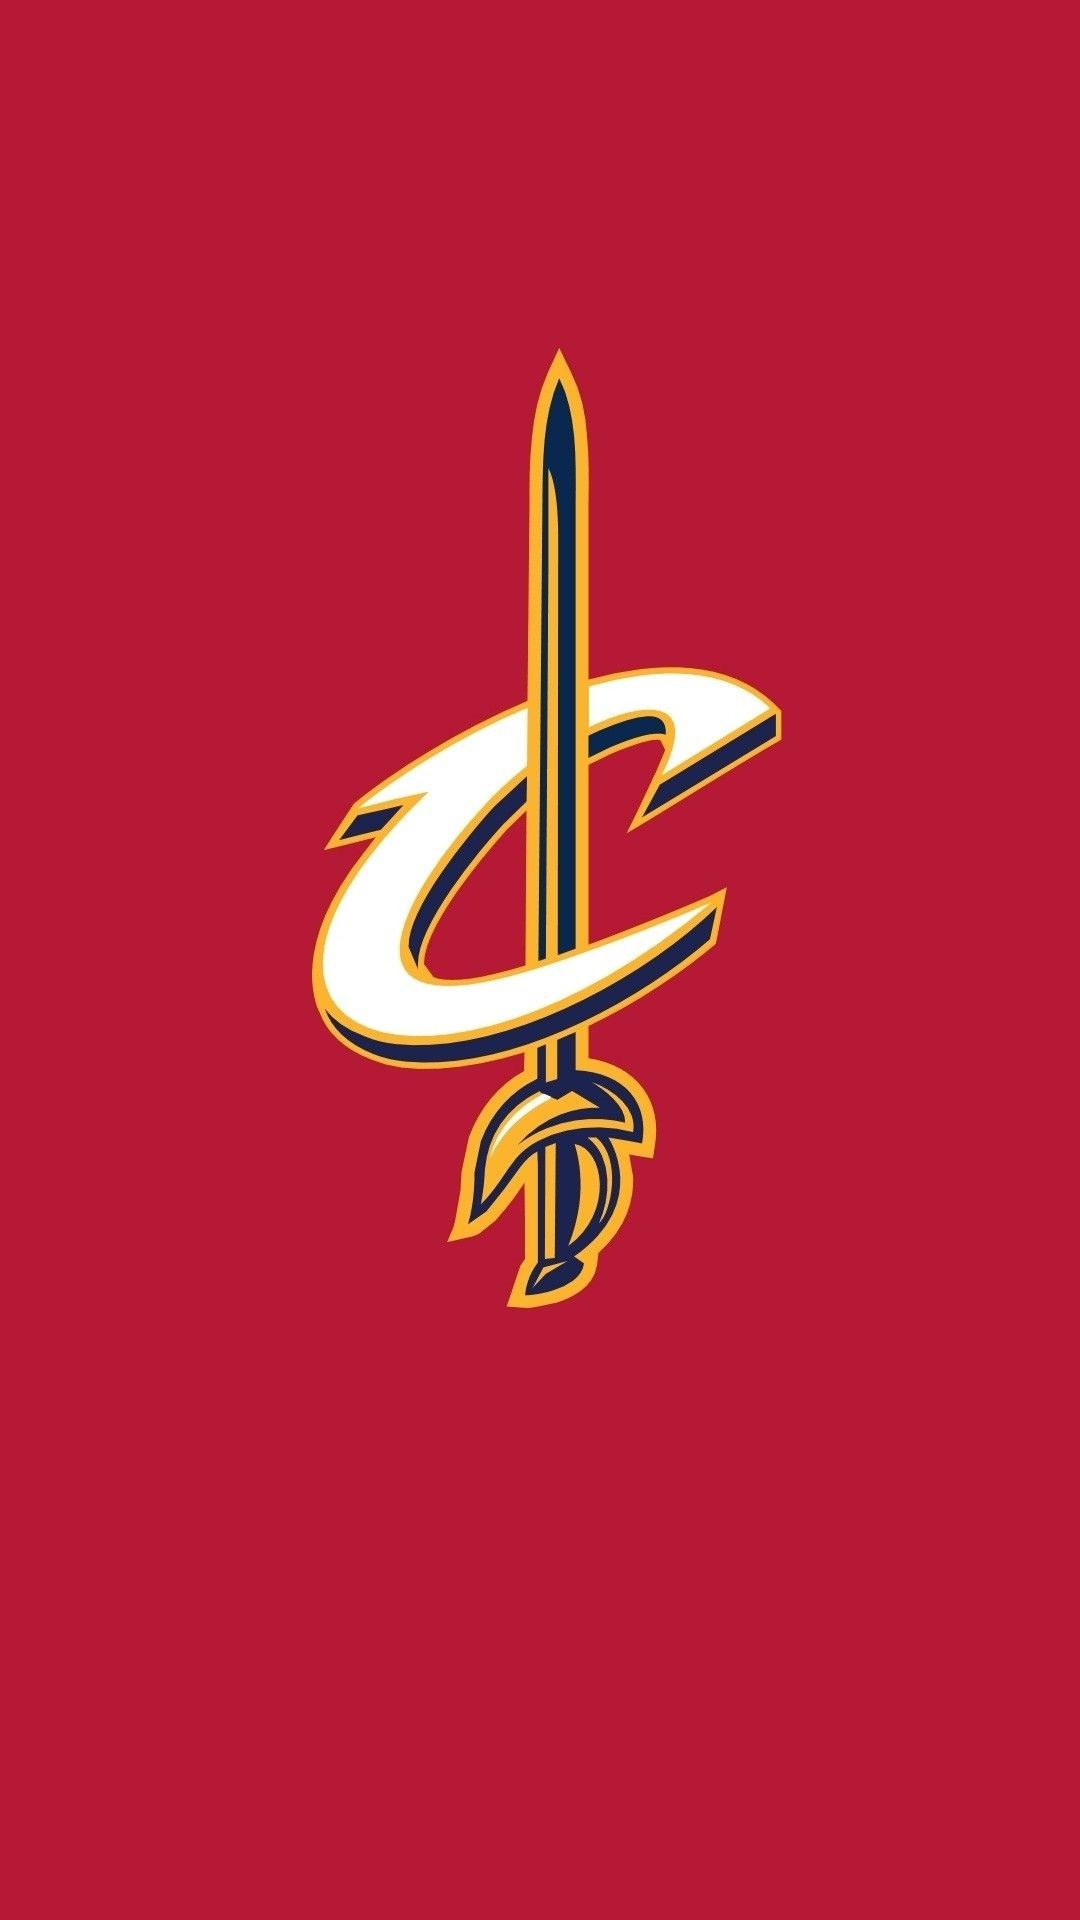 1080x1920 Cleveland Cavaliers Wallpaper For Iphone - Best iPhone Wallpaper